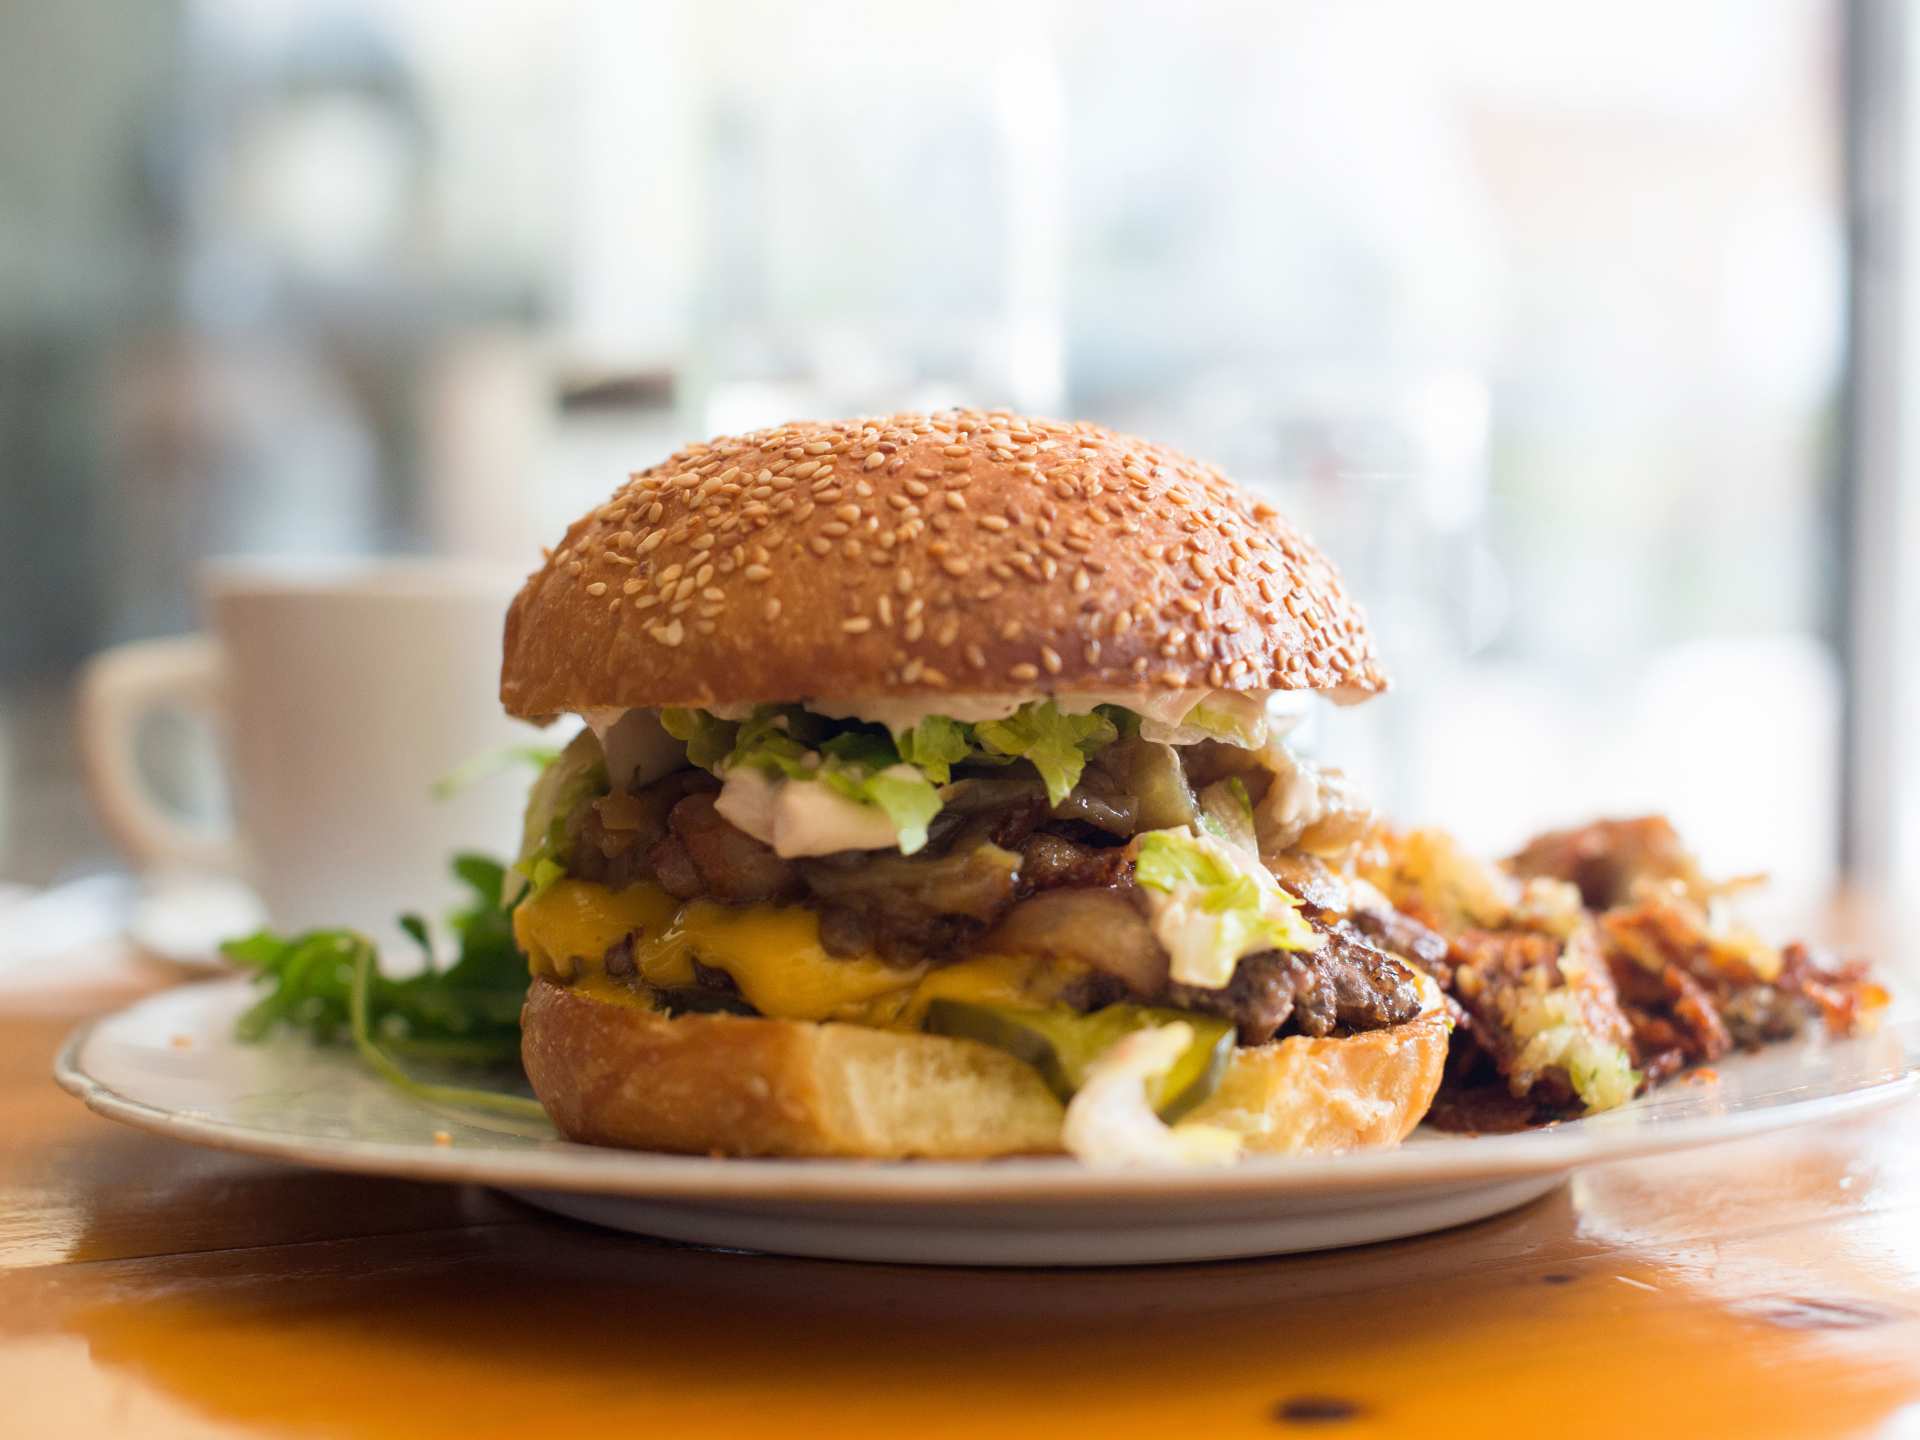 Best brunch in Toronto | A burger at The Federal